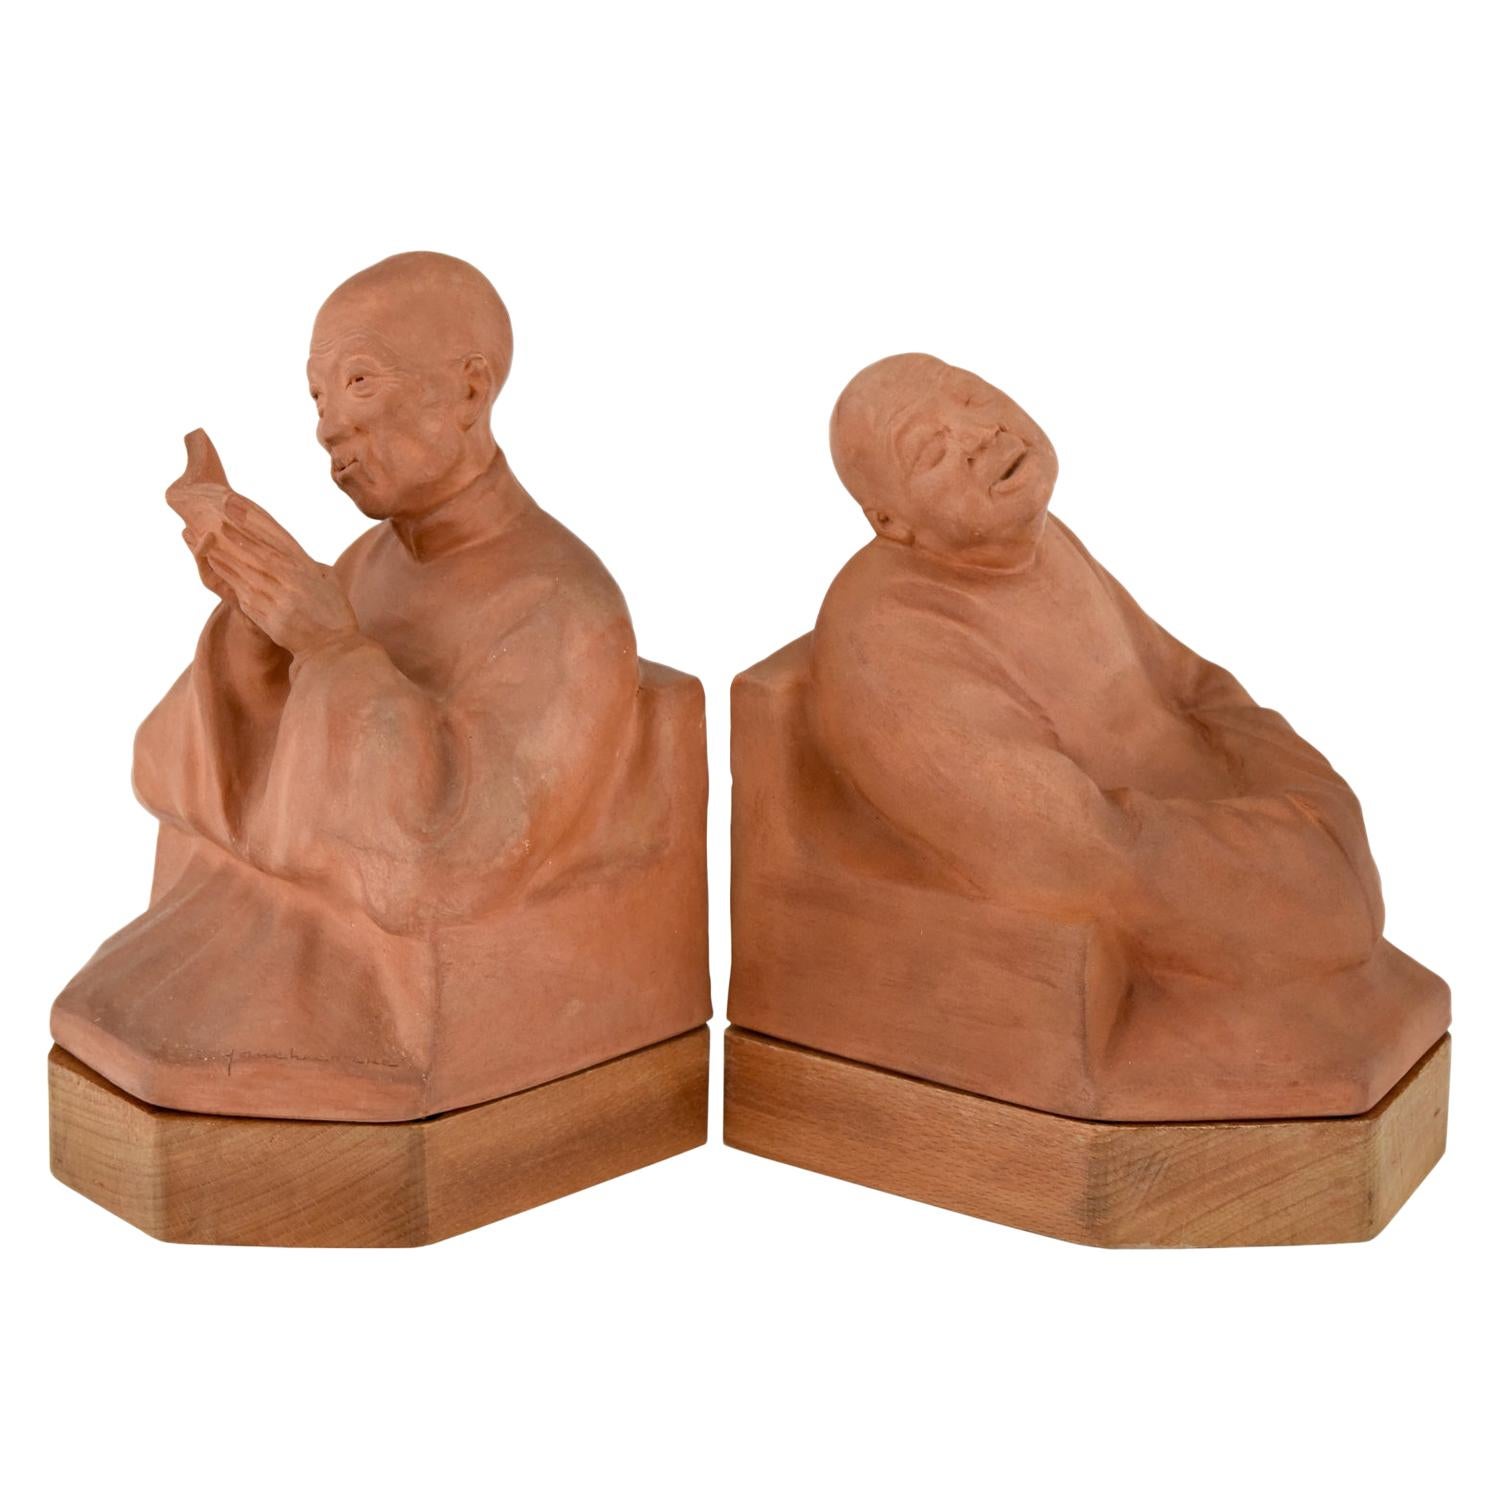 Art Deco Terracotta Bookends with Chinese Men Gaston Hauchecorne, France, 1925